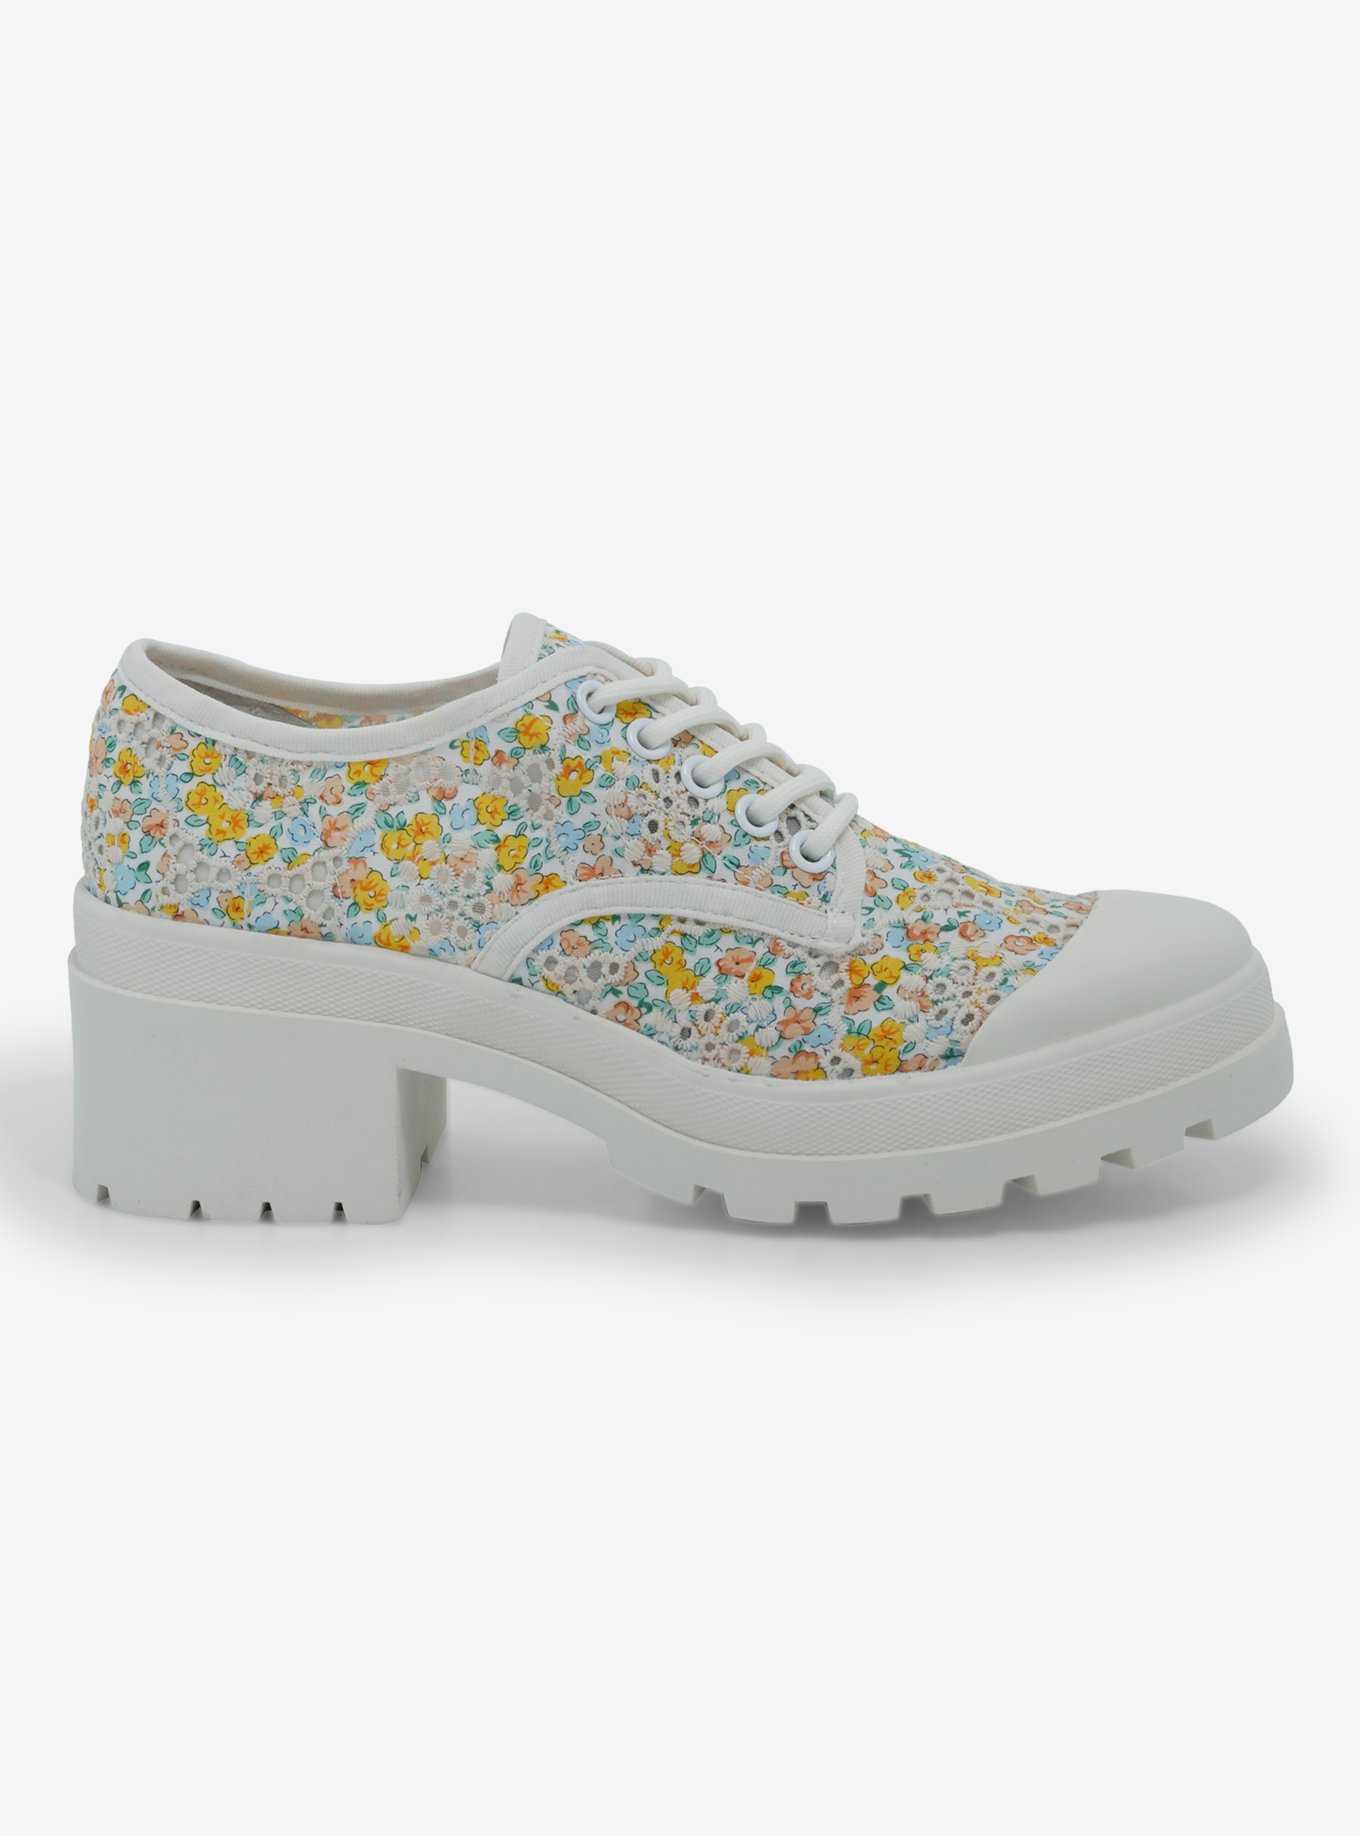 Chinese Laundry Floral Heeled Sneakers, , hi-res